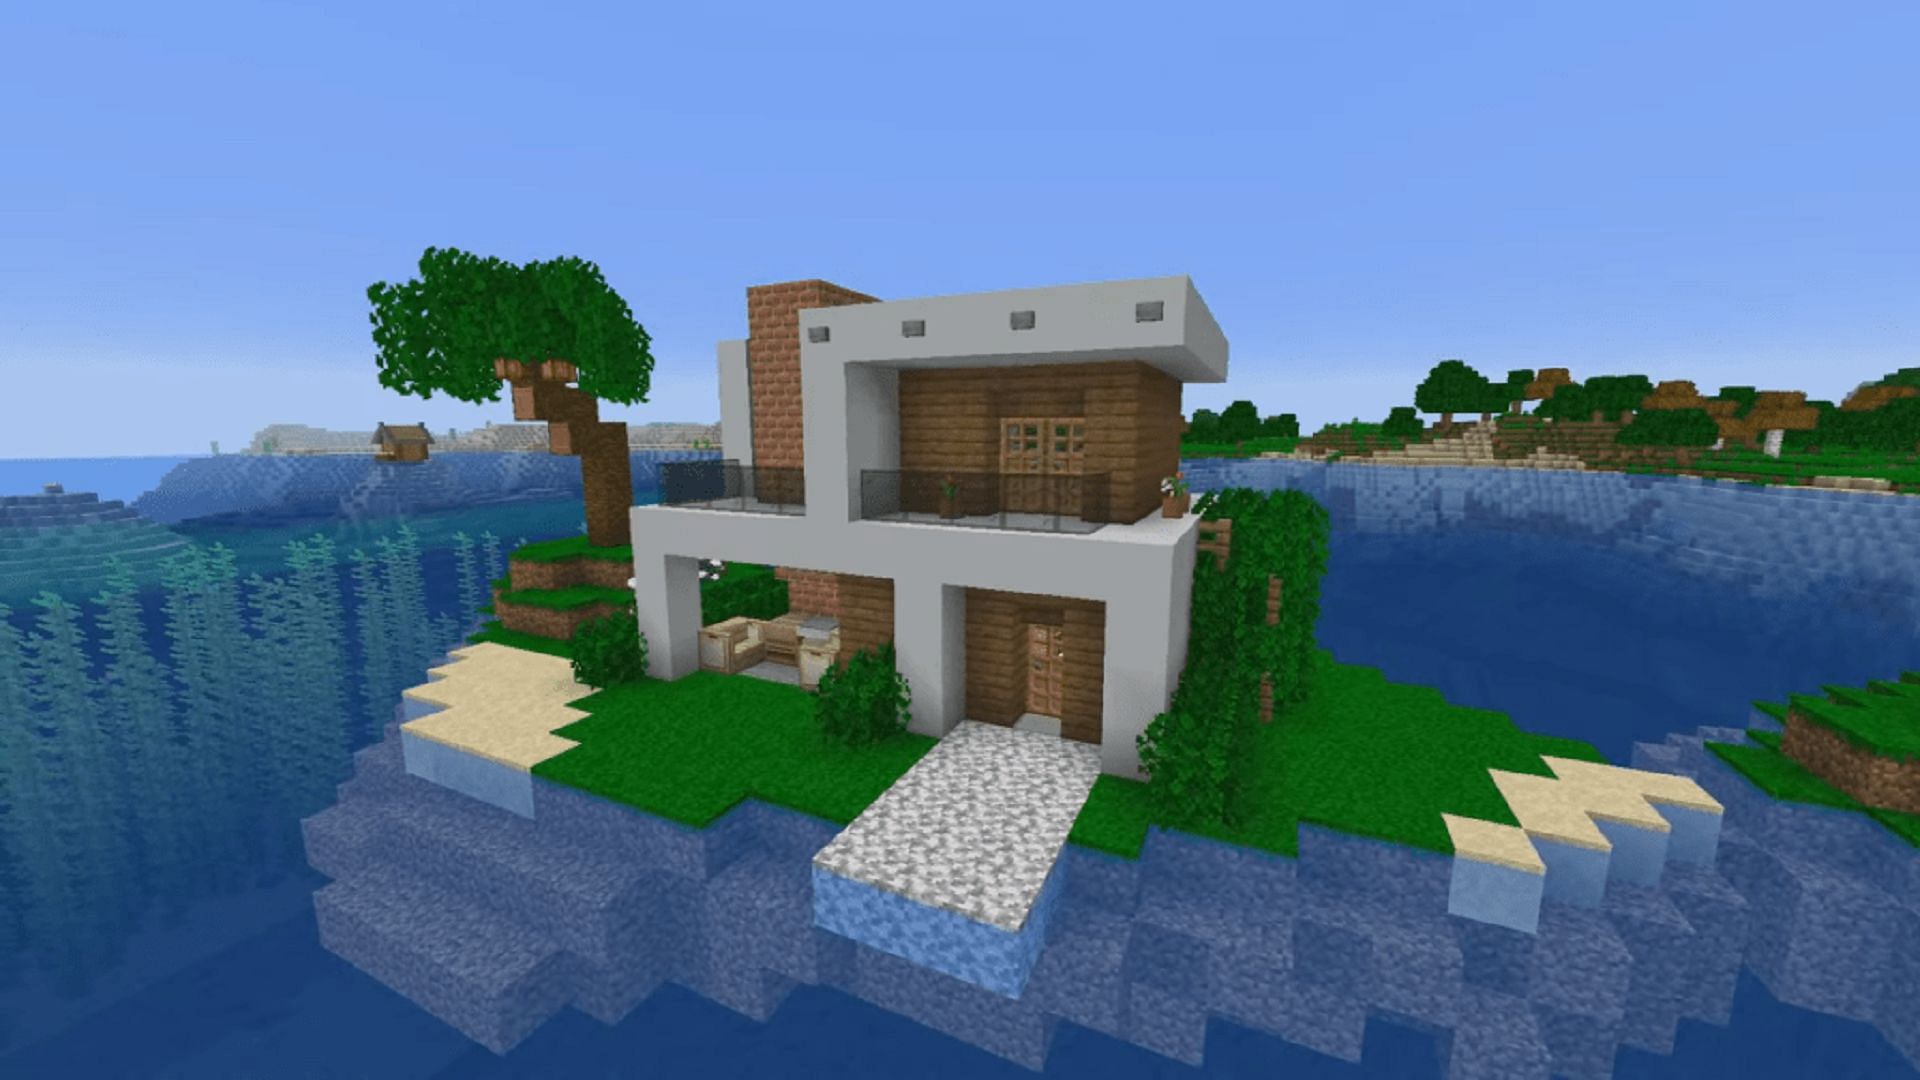 This seaside house is perfect for a survival island scenario (Image via Smithers Boss/YouTube)